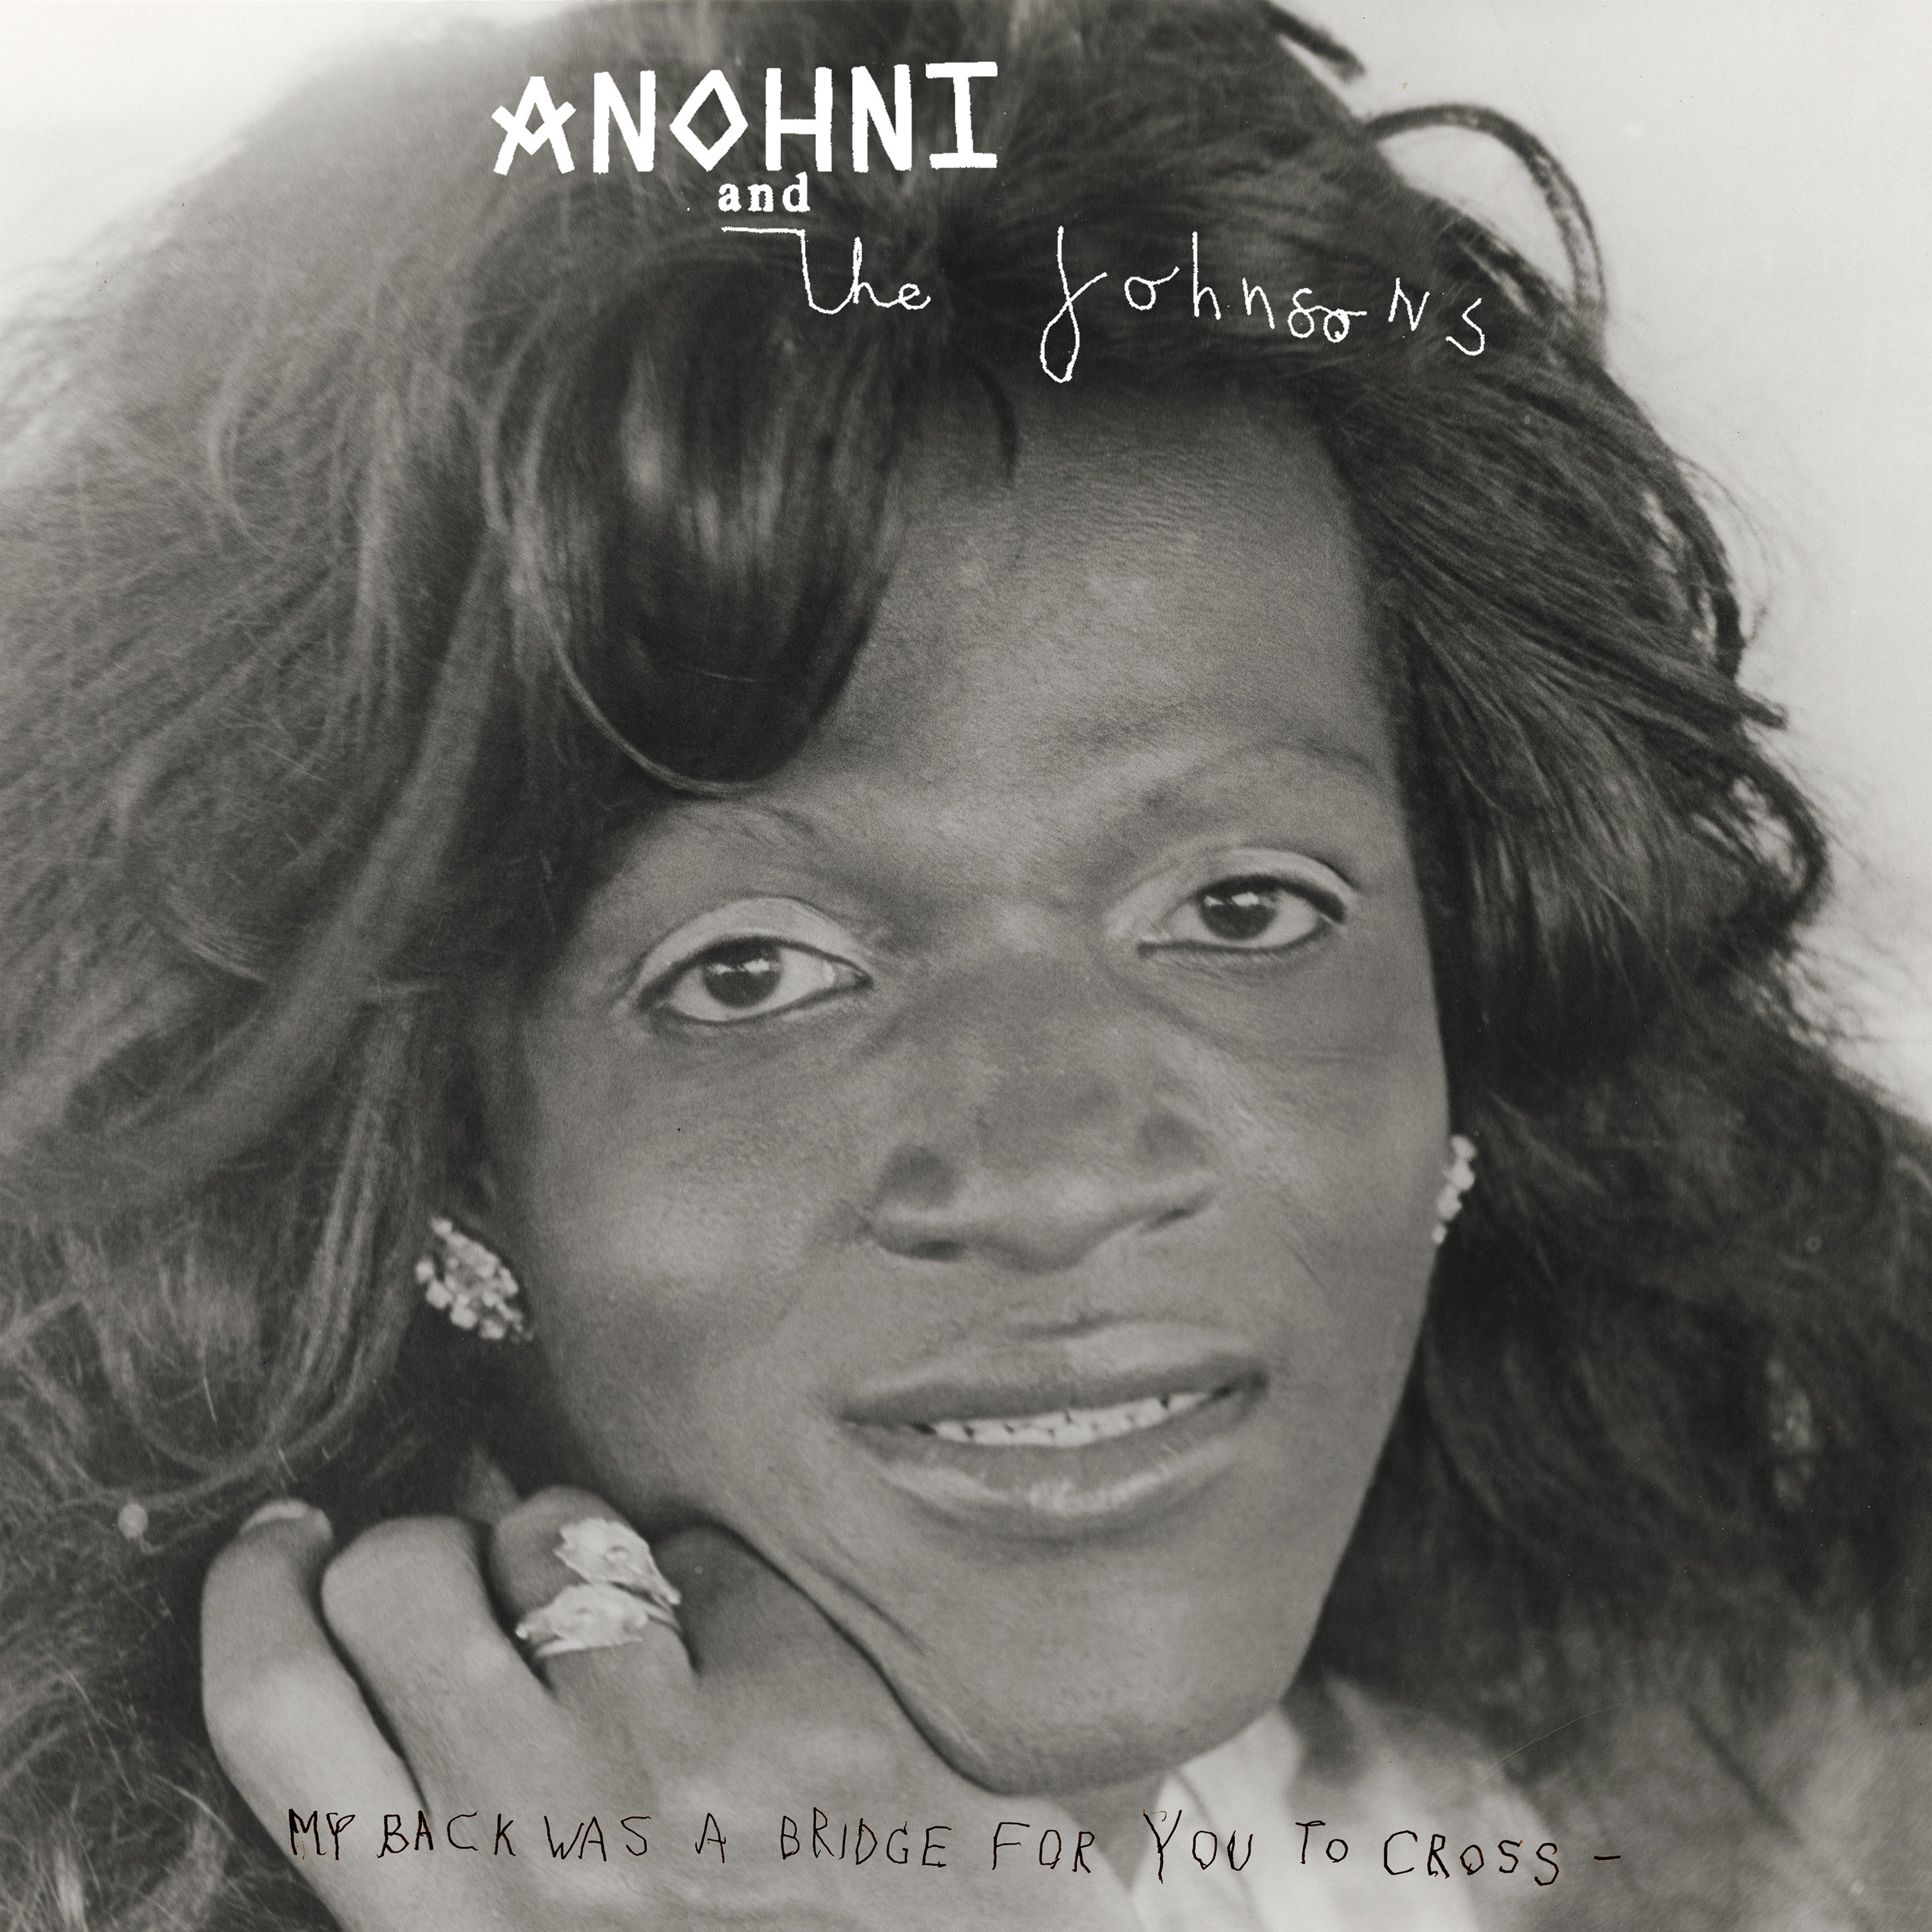 ANOHNI and the Johnsons - My Back Was A Bridge For You To Cross [White Vinyl]